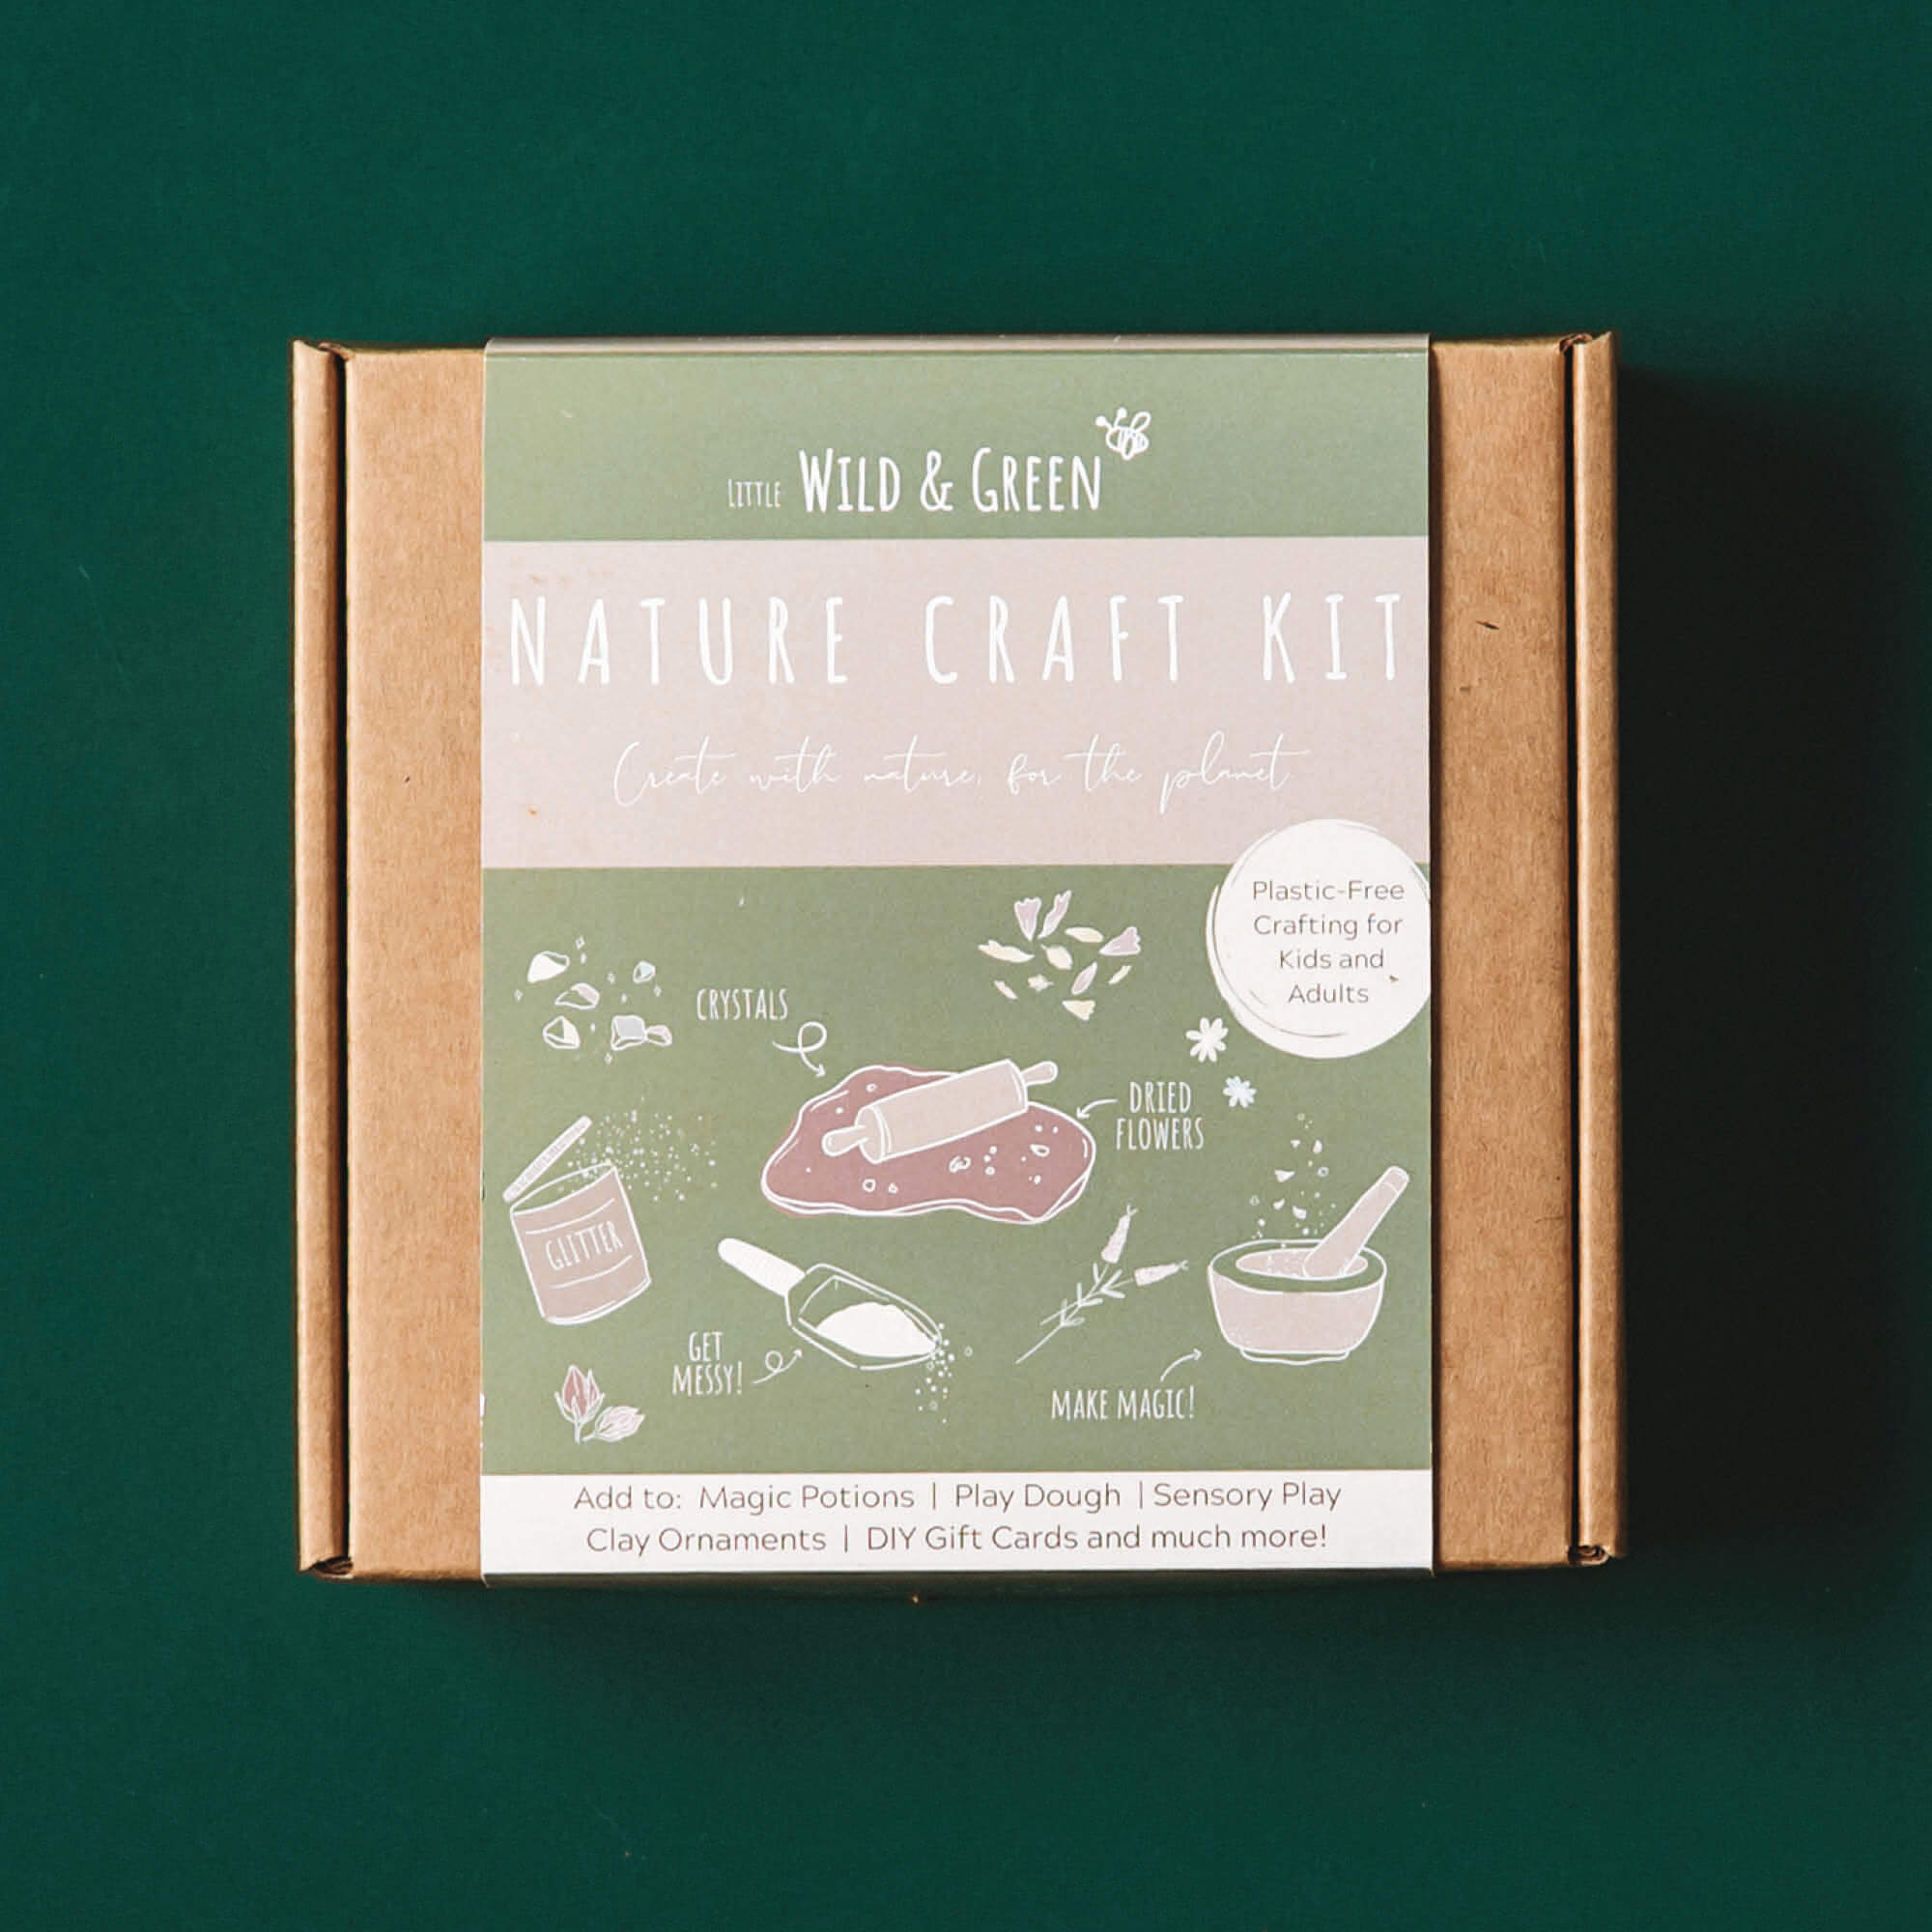 Plastic free Nature craft kit by Little Wild and Green made with all natural materials including 4 bags of petals, 2 paint powders, 1 eco glitter, a box of crystal chips and a wooden spoon. perfect for nature crafting for kids including playdough, clay and magic potions from Your Wild Books